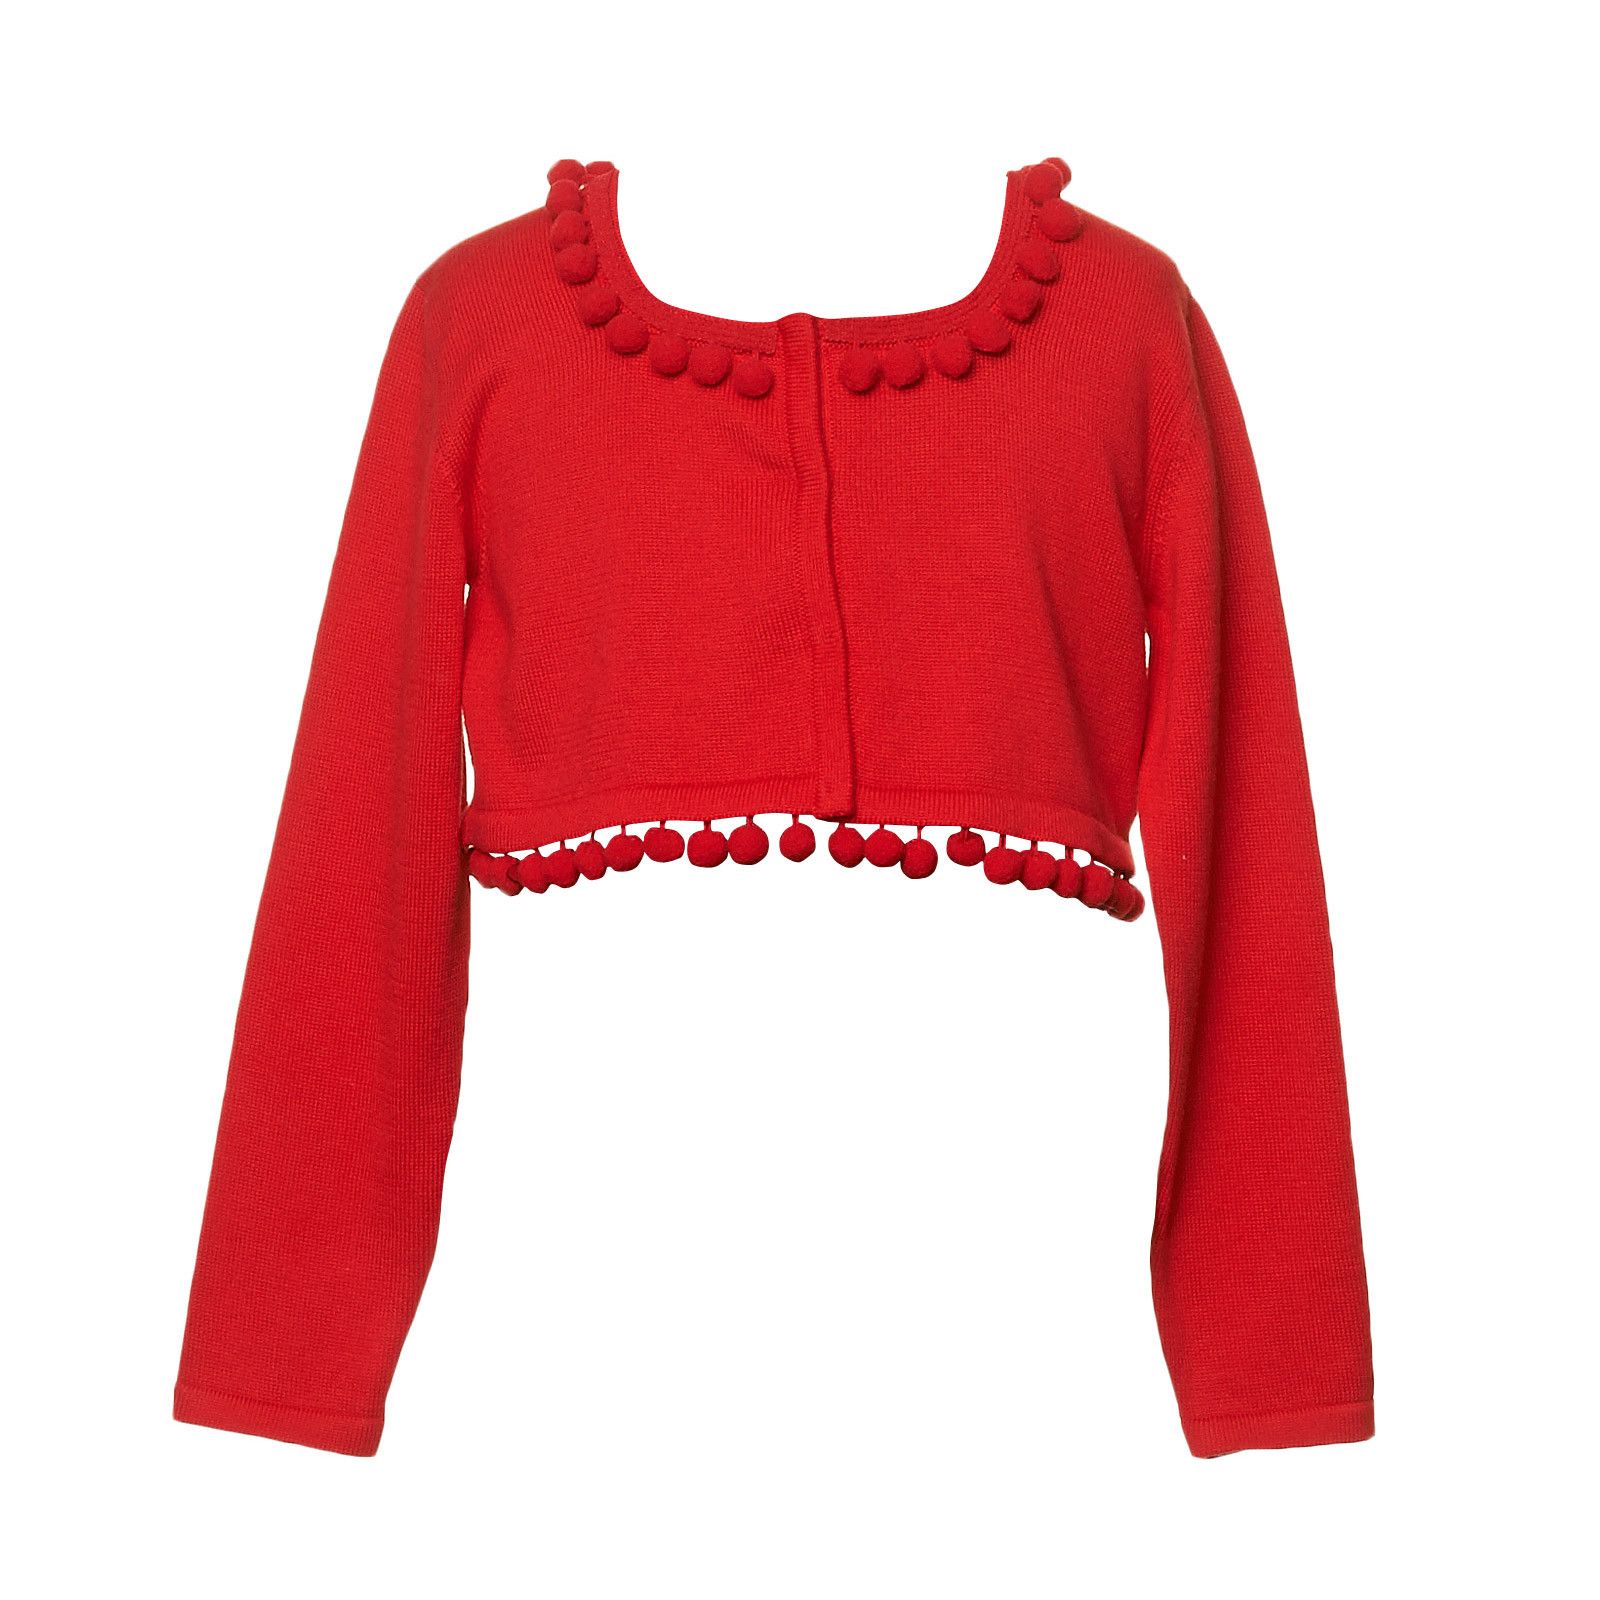 Girls Red Knitted Short Cardigan With Lace Collar - CÉMAROSE | Children's Fashion Store - 1